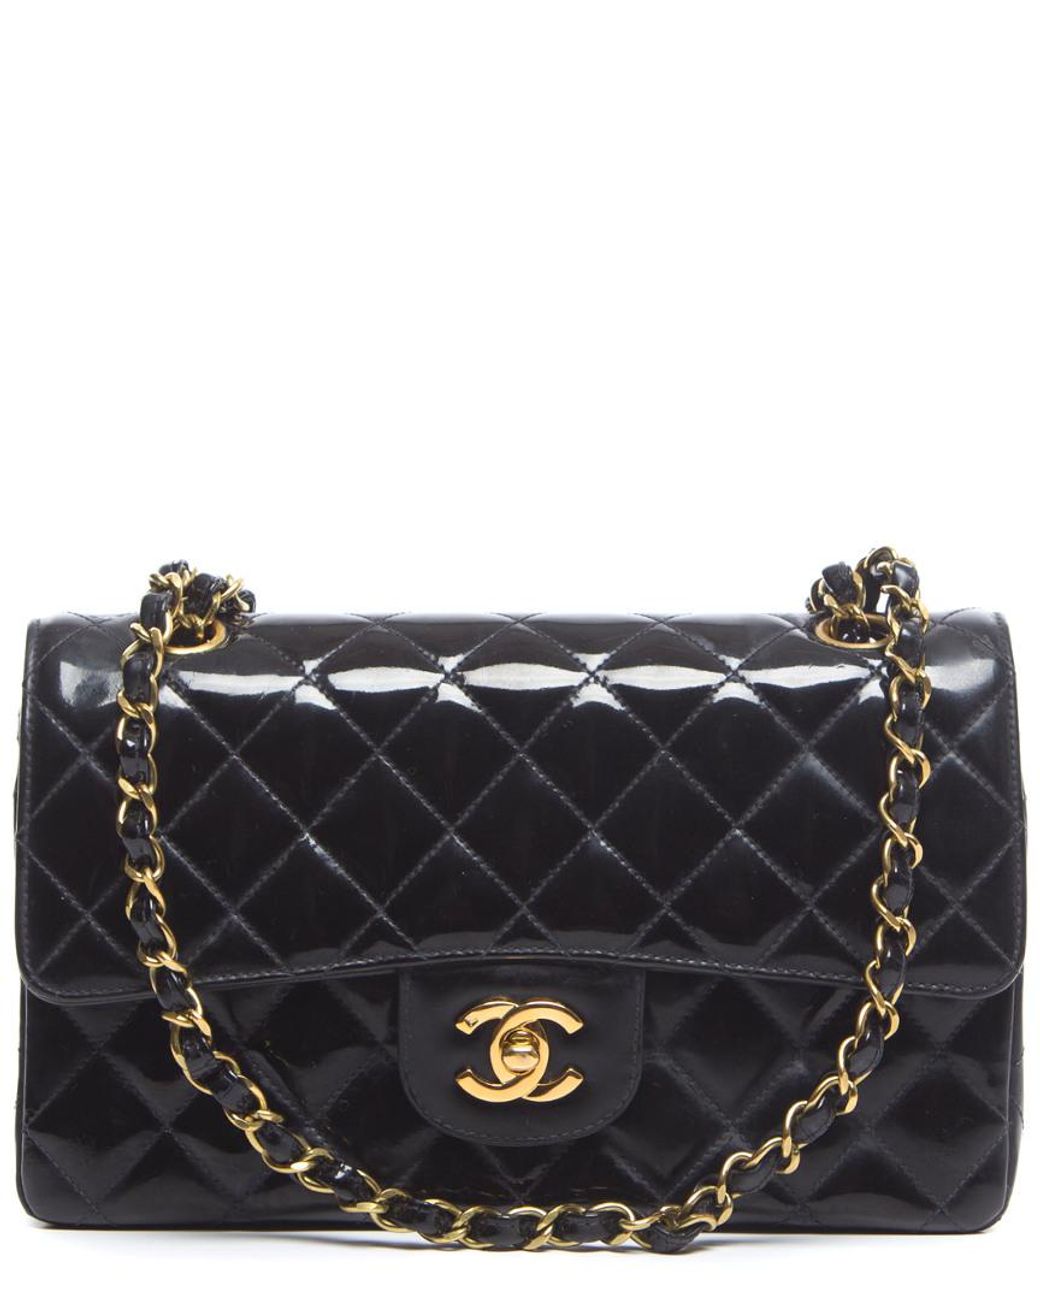 Chanel Black Quilted Patent Leather Small Double Flap Bag